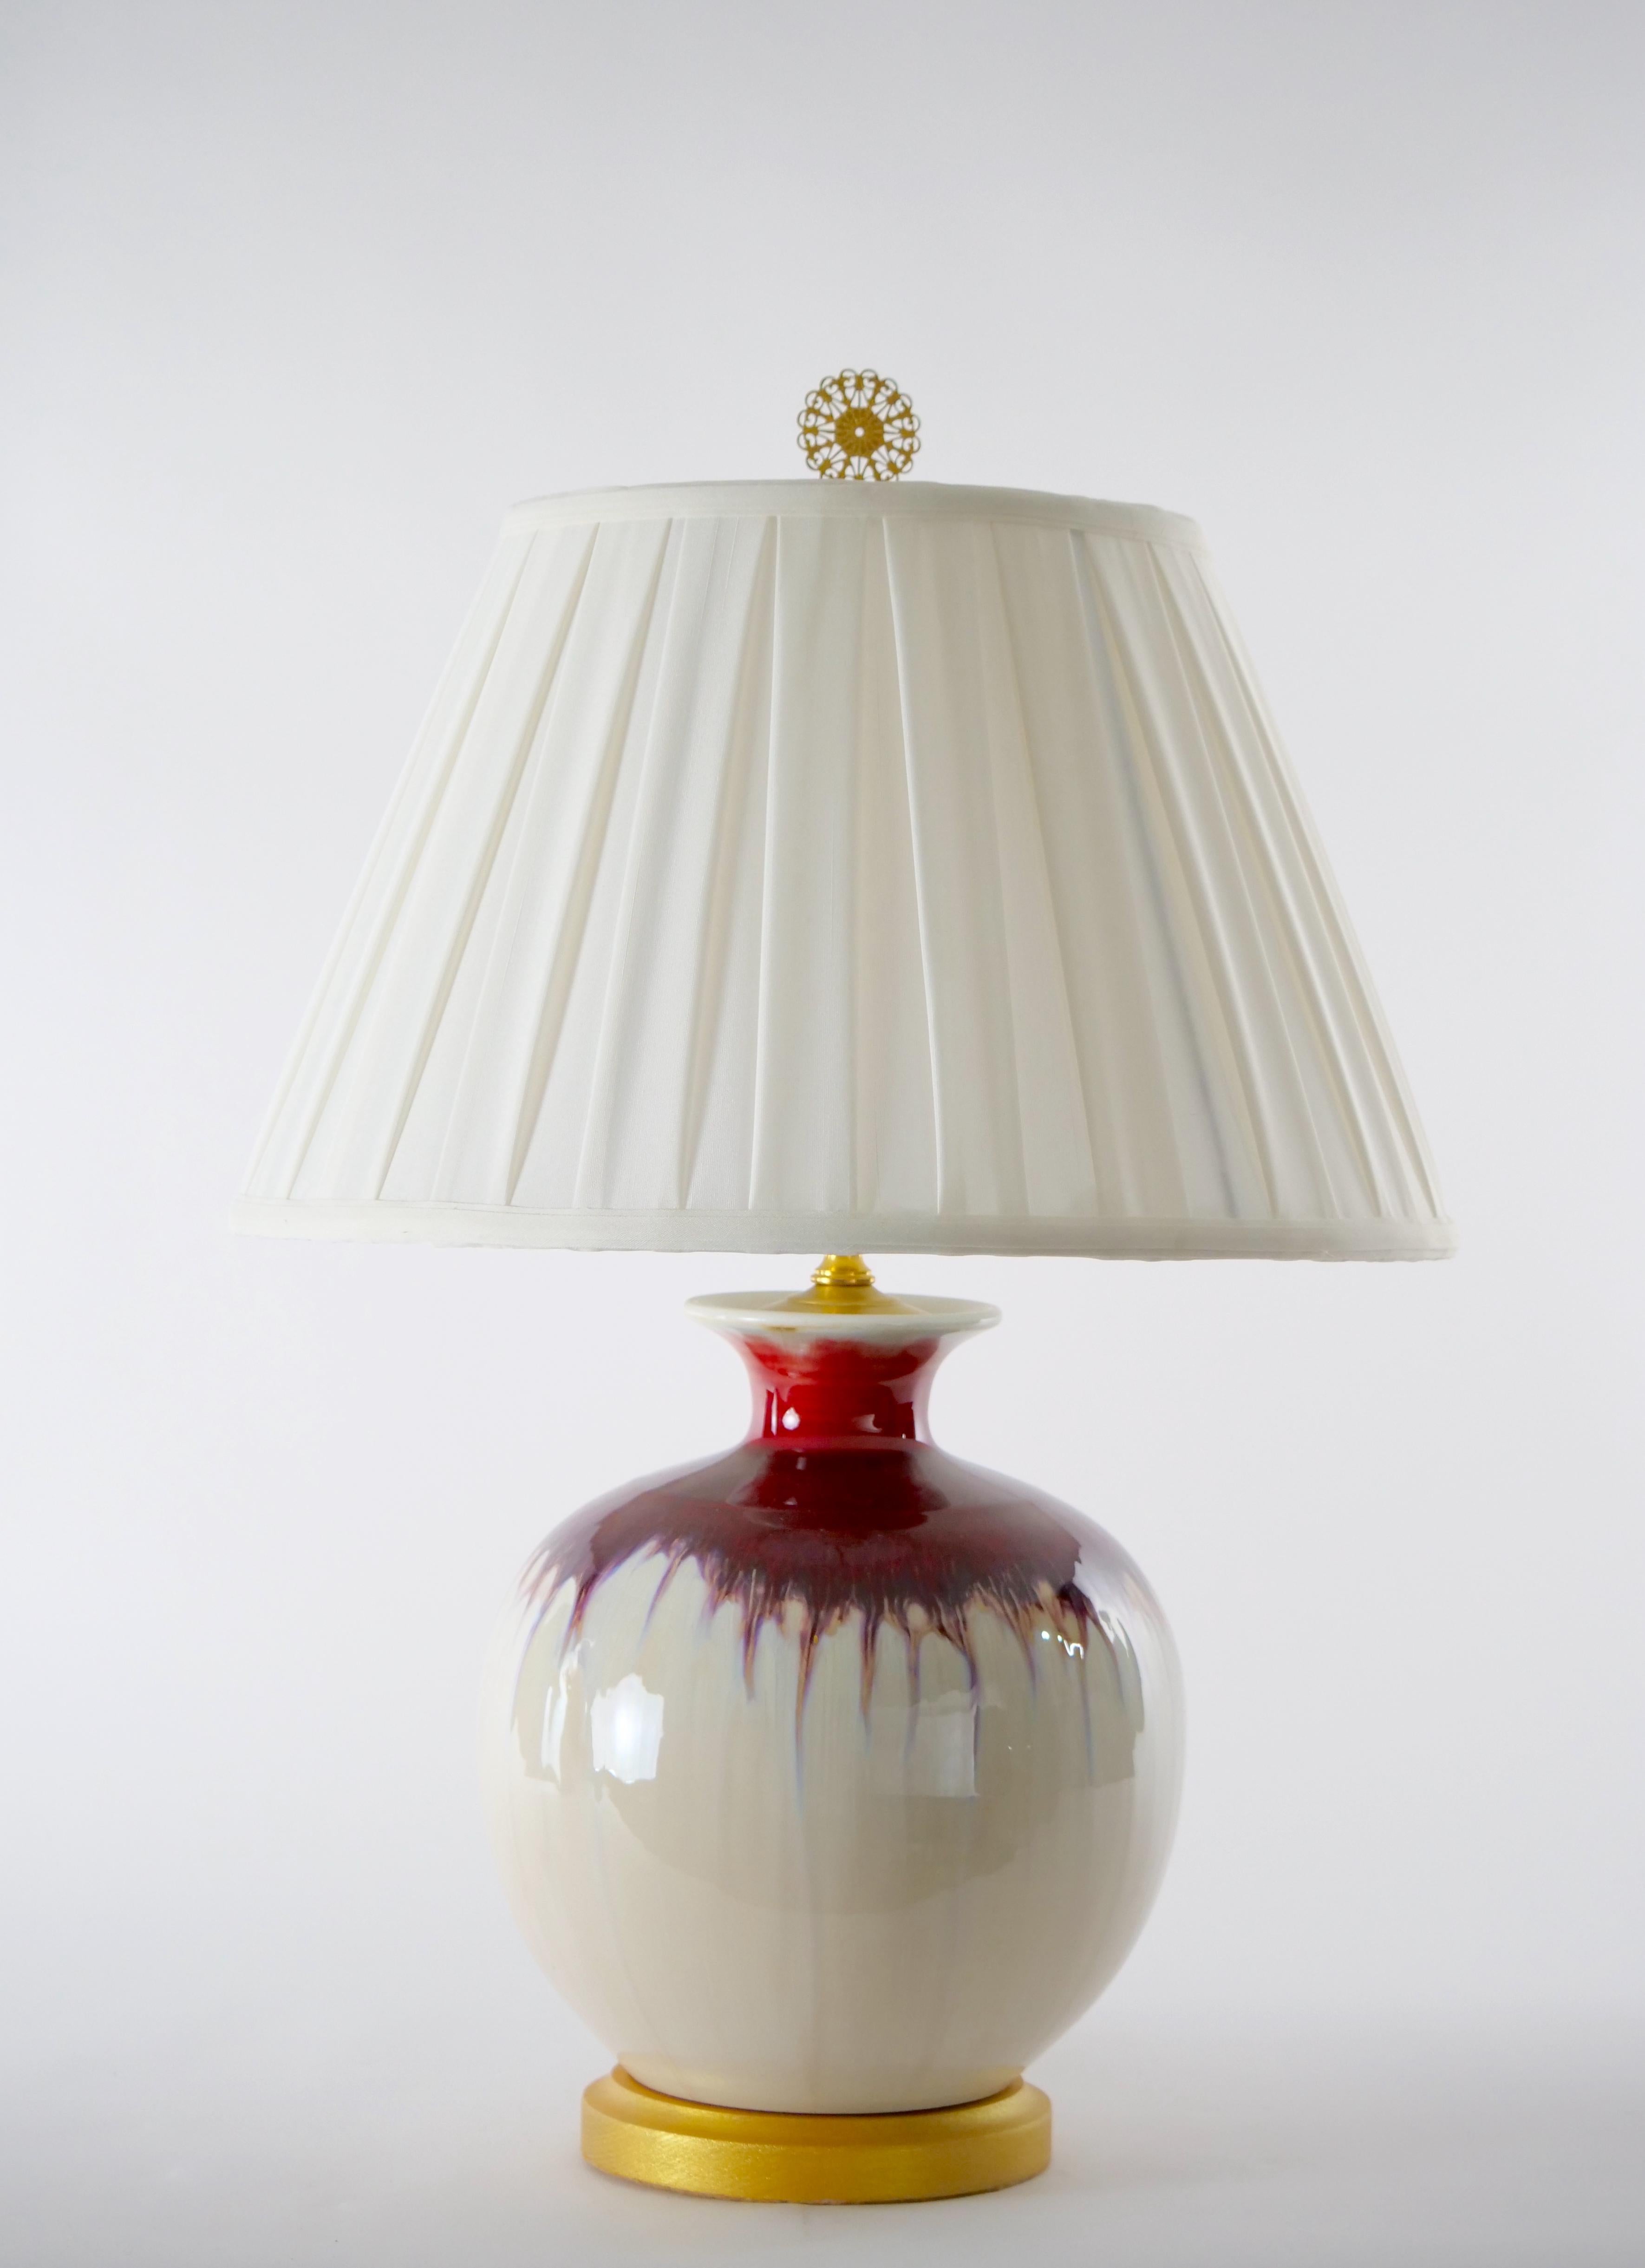 20th century flambe porcelain bottle shape vase table lamp with gilt wood base. Each lamp features a bright red and beige glaze color in a bottle shape form with flared neck , resting on a round gilt wooden base. Each one is in great working